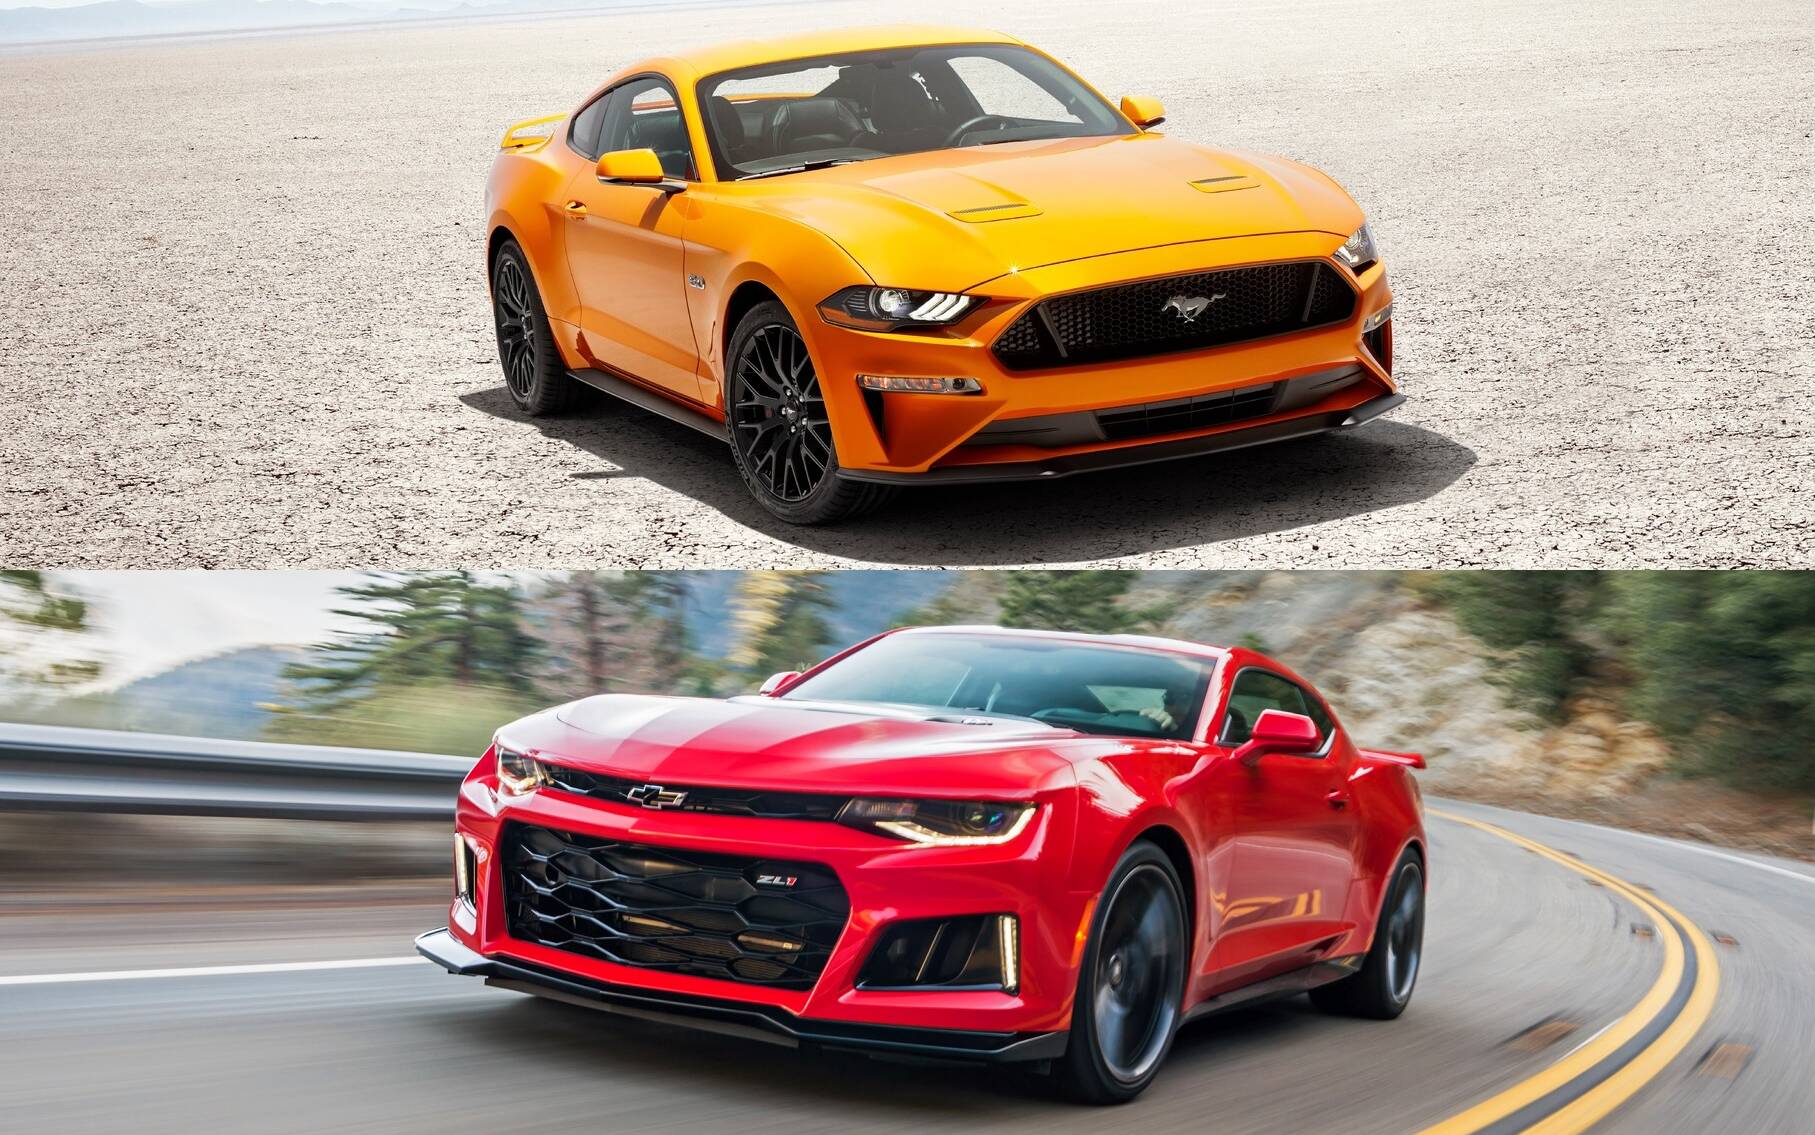 Pre-Owned Ford Mustang or Chevrolet Camaro: Which One Should You Choose? |  Otogo